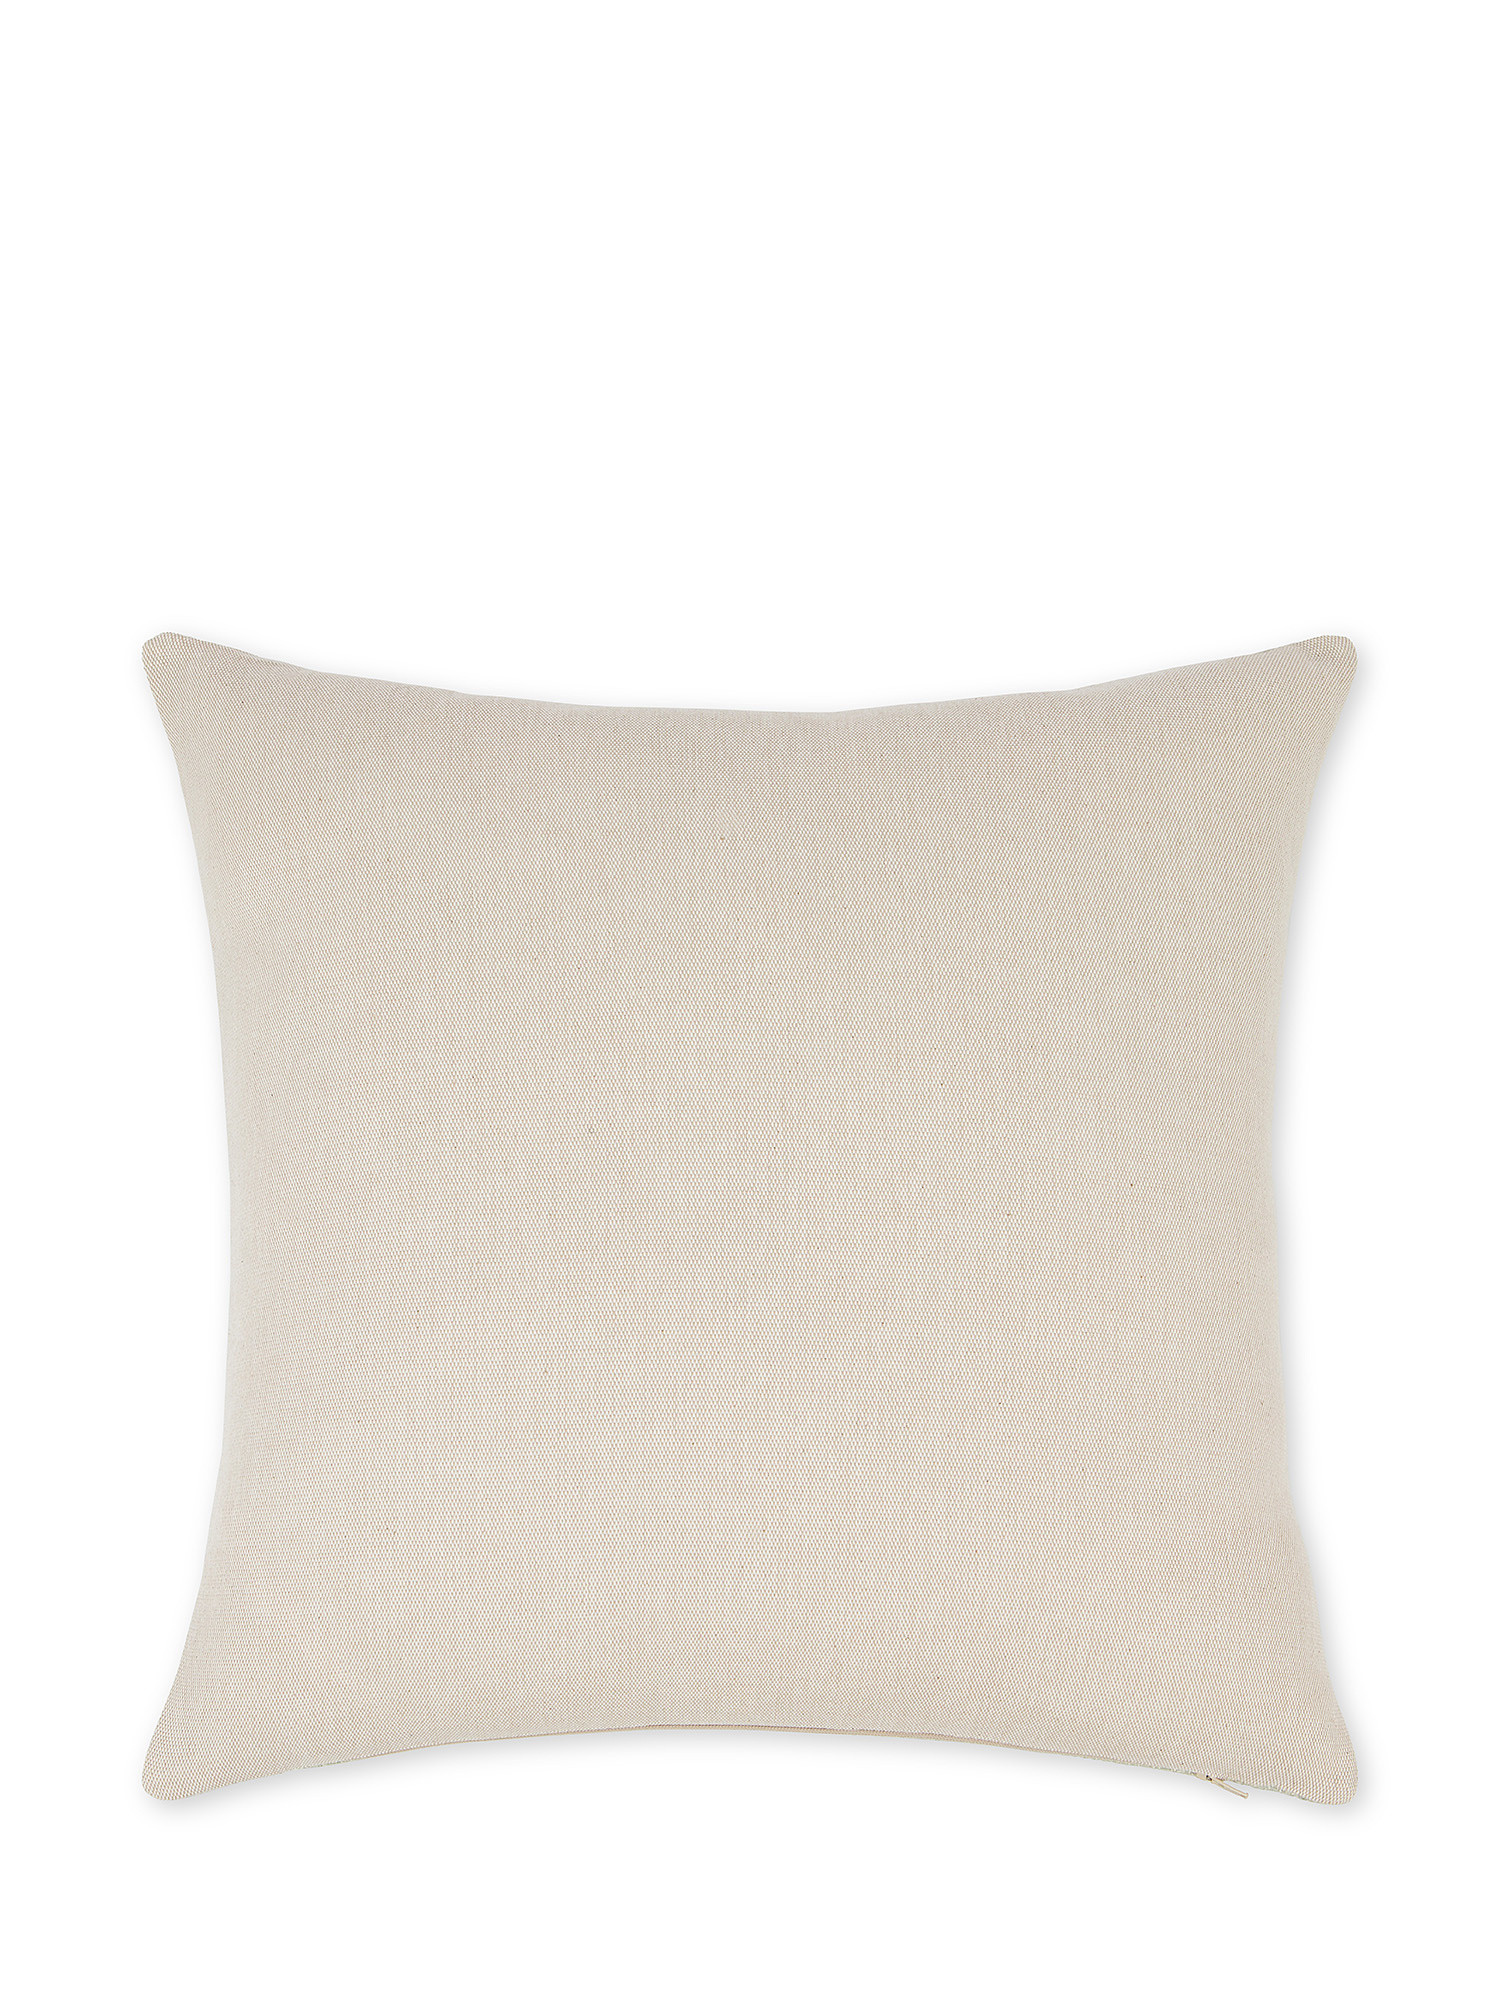 45x45 cm cushion in cotton and linen, Beige, large image number 1